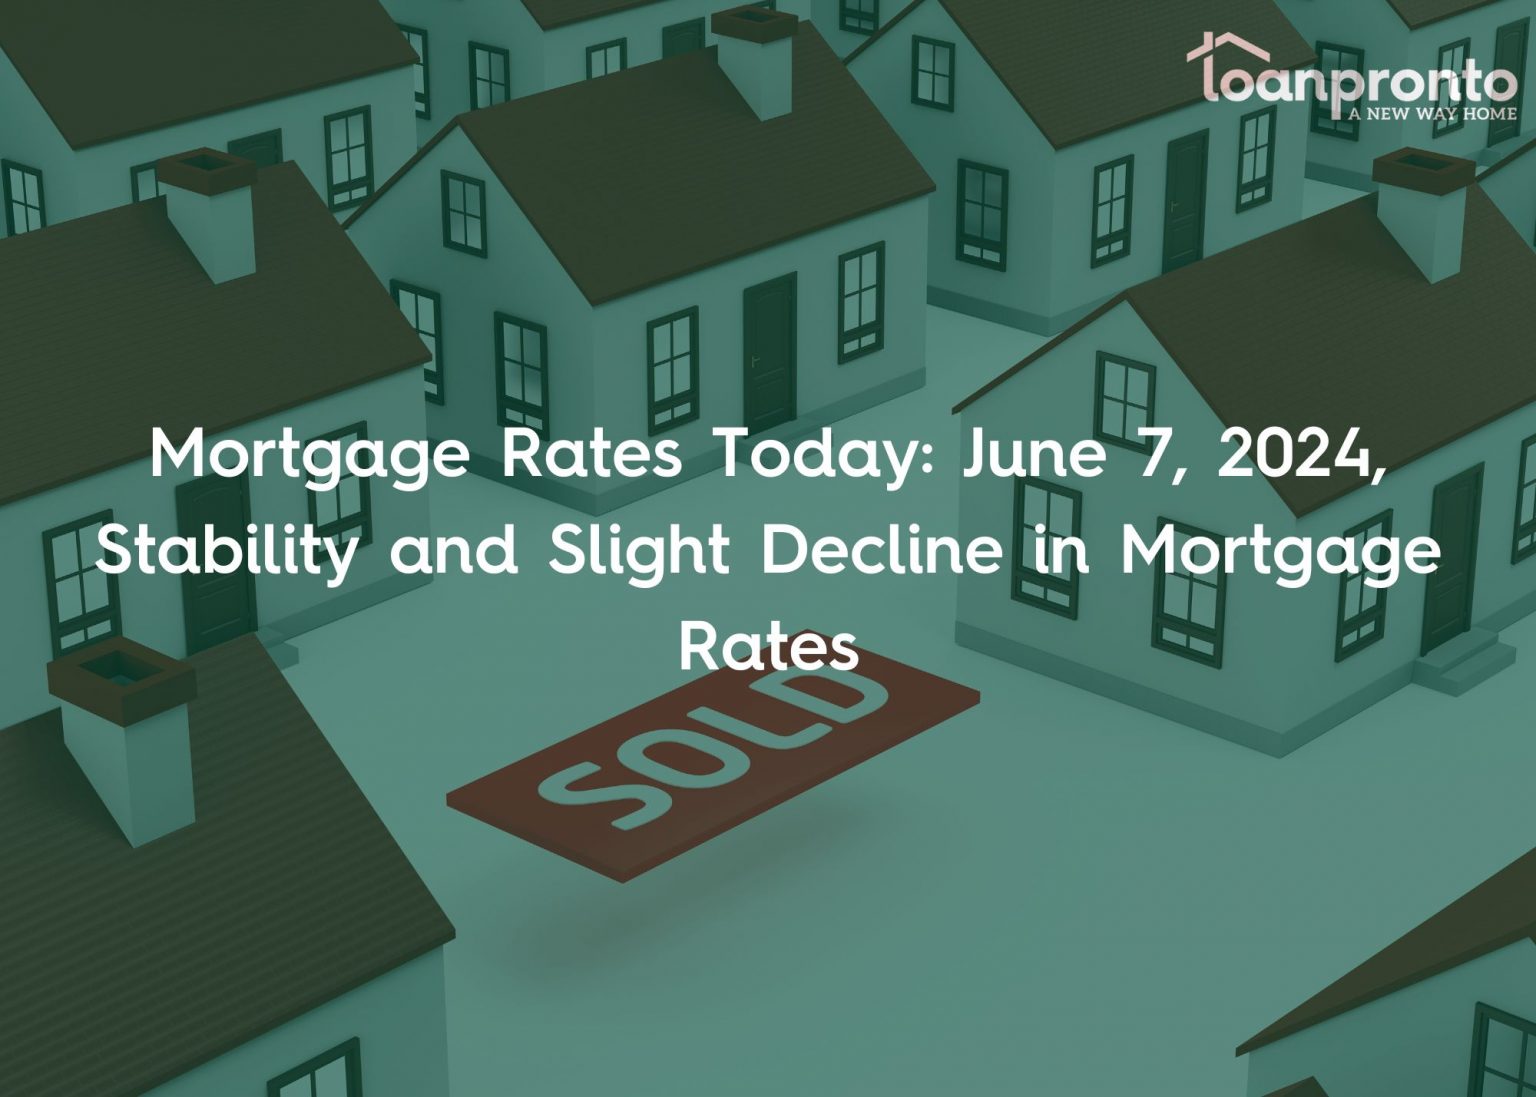 rates remain steady and shows stability in the mortgage market today and for the past few weeks